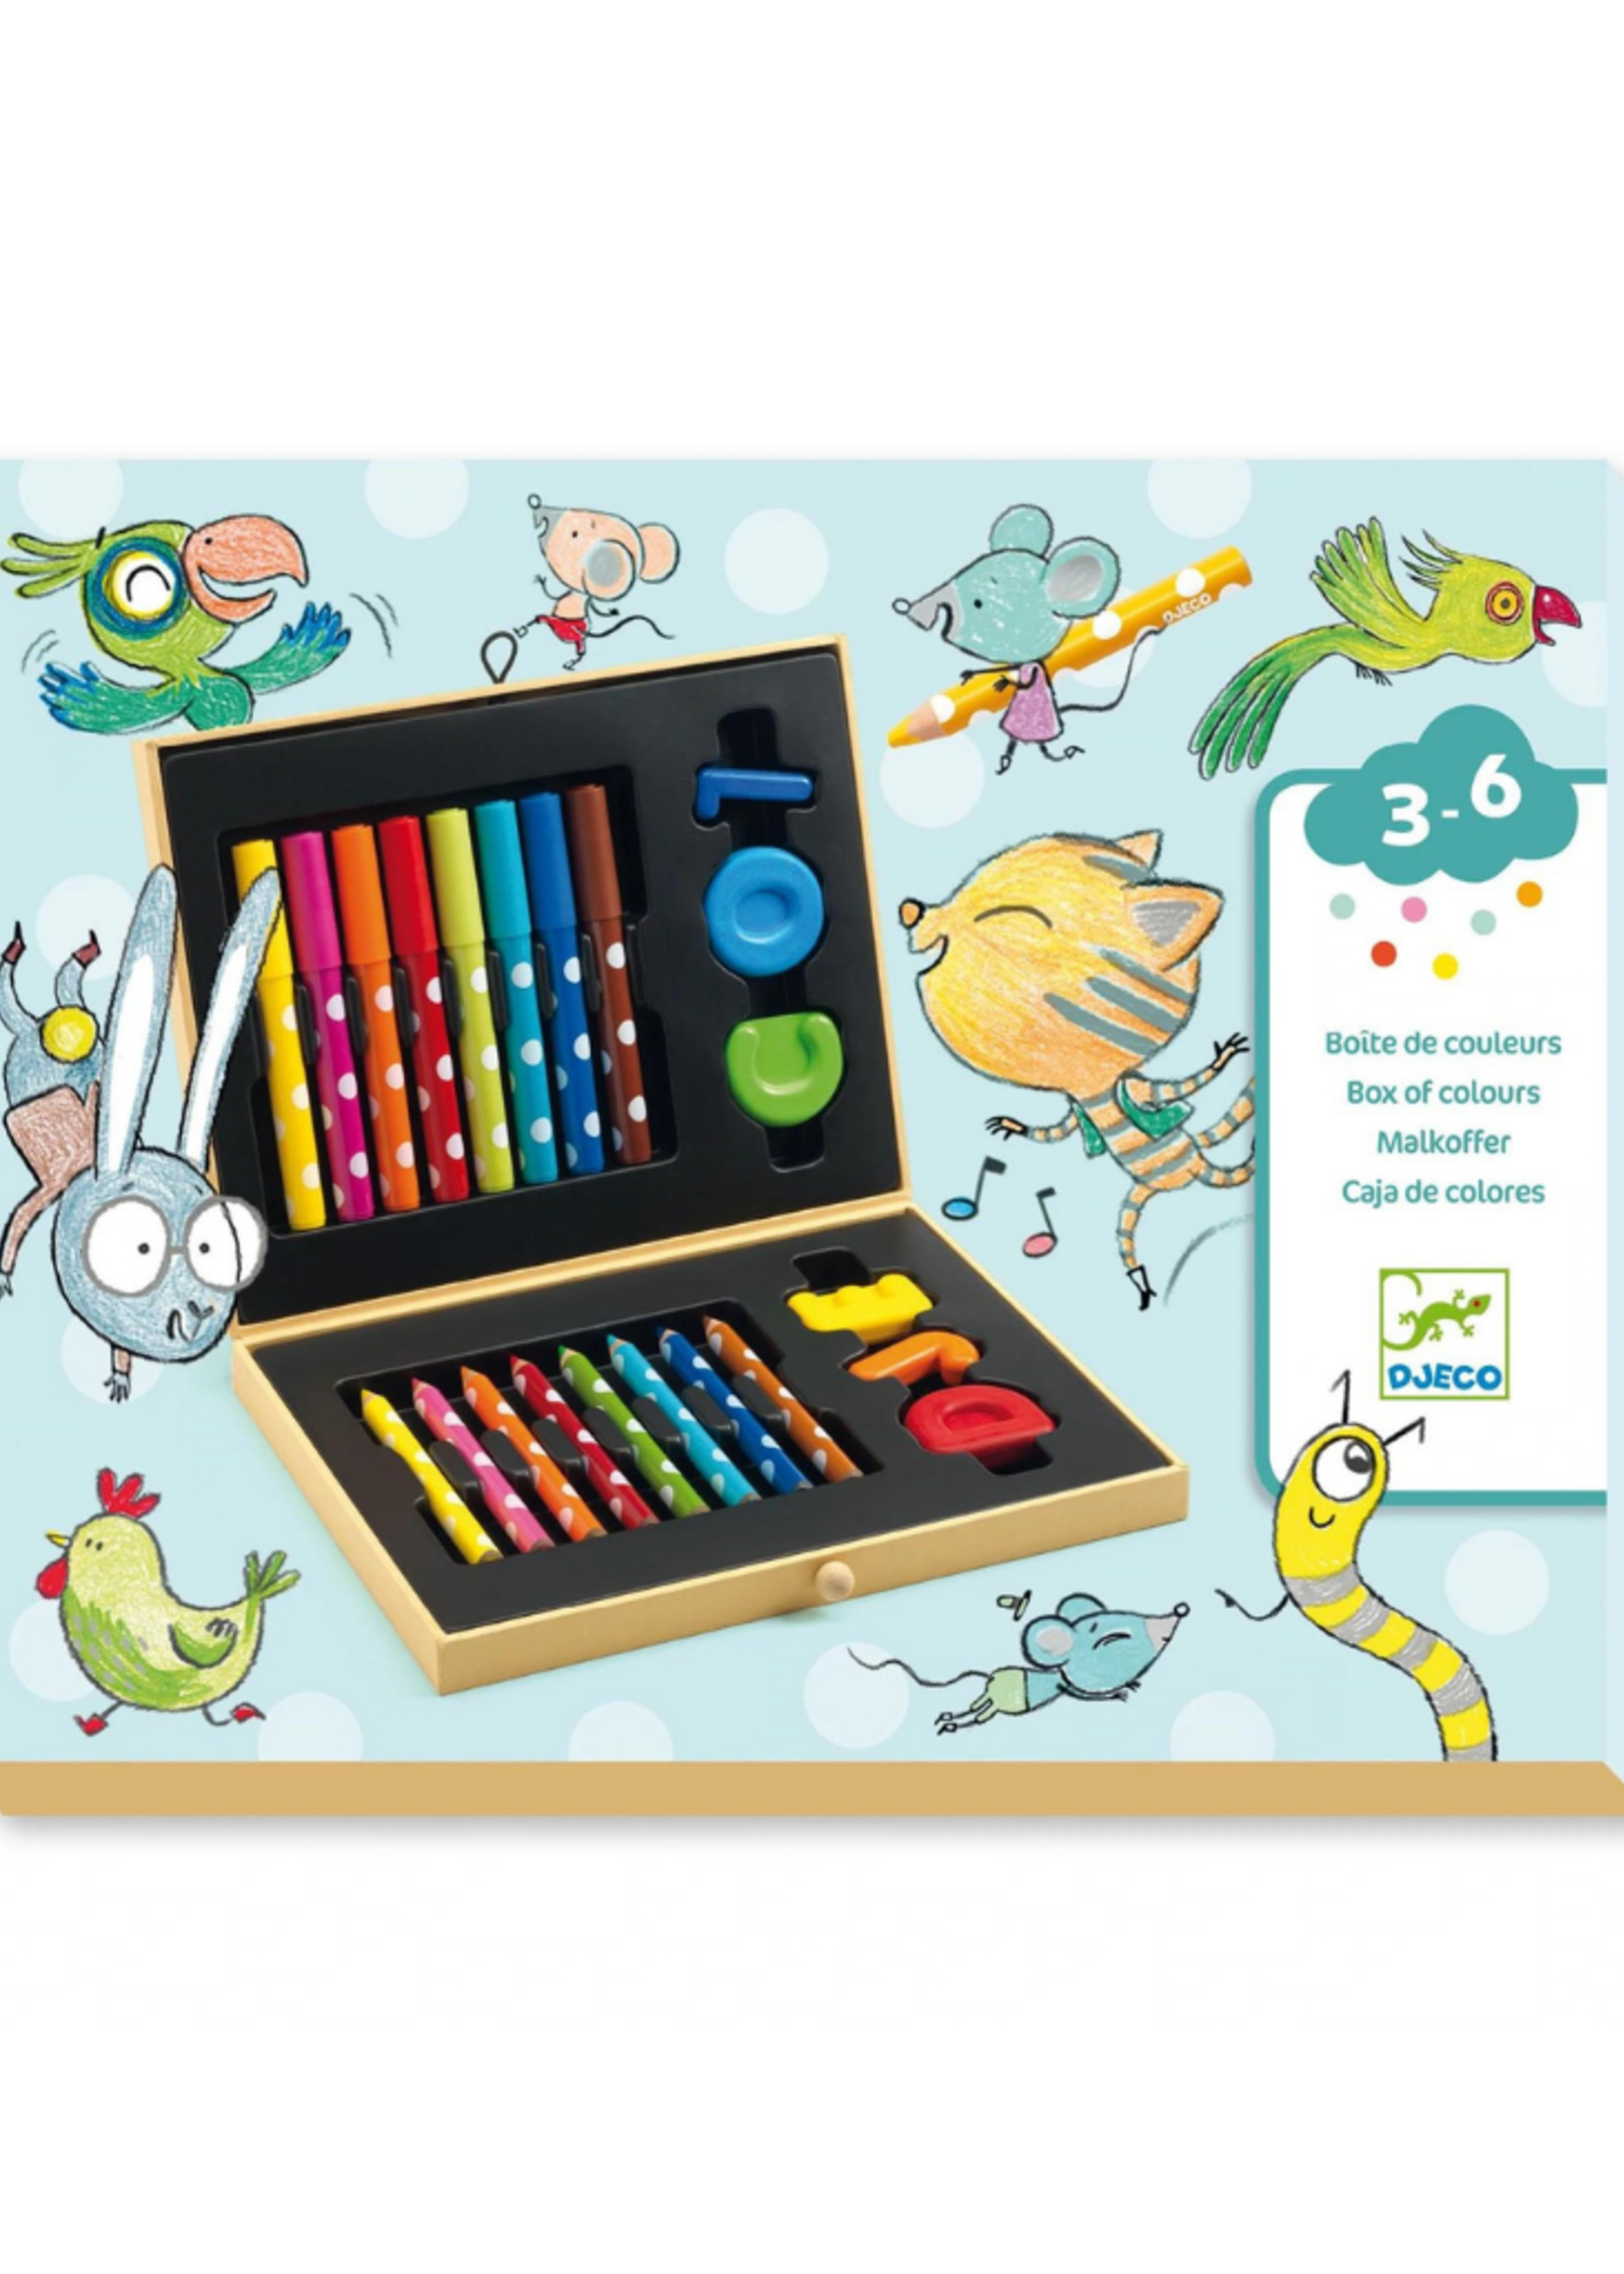 Djeco Box of Colors for Toddlers